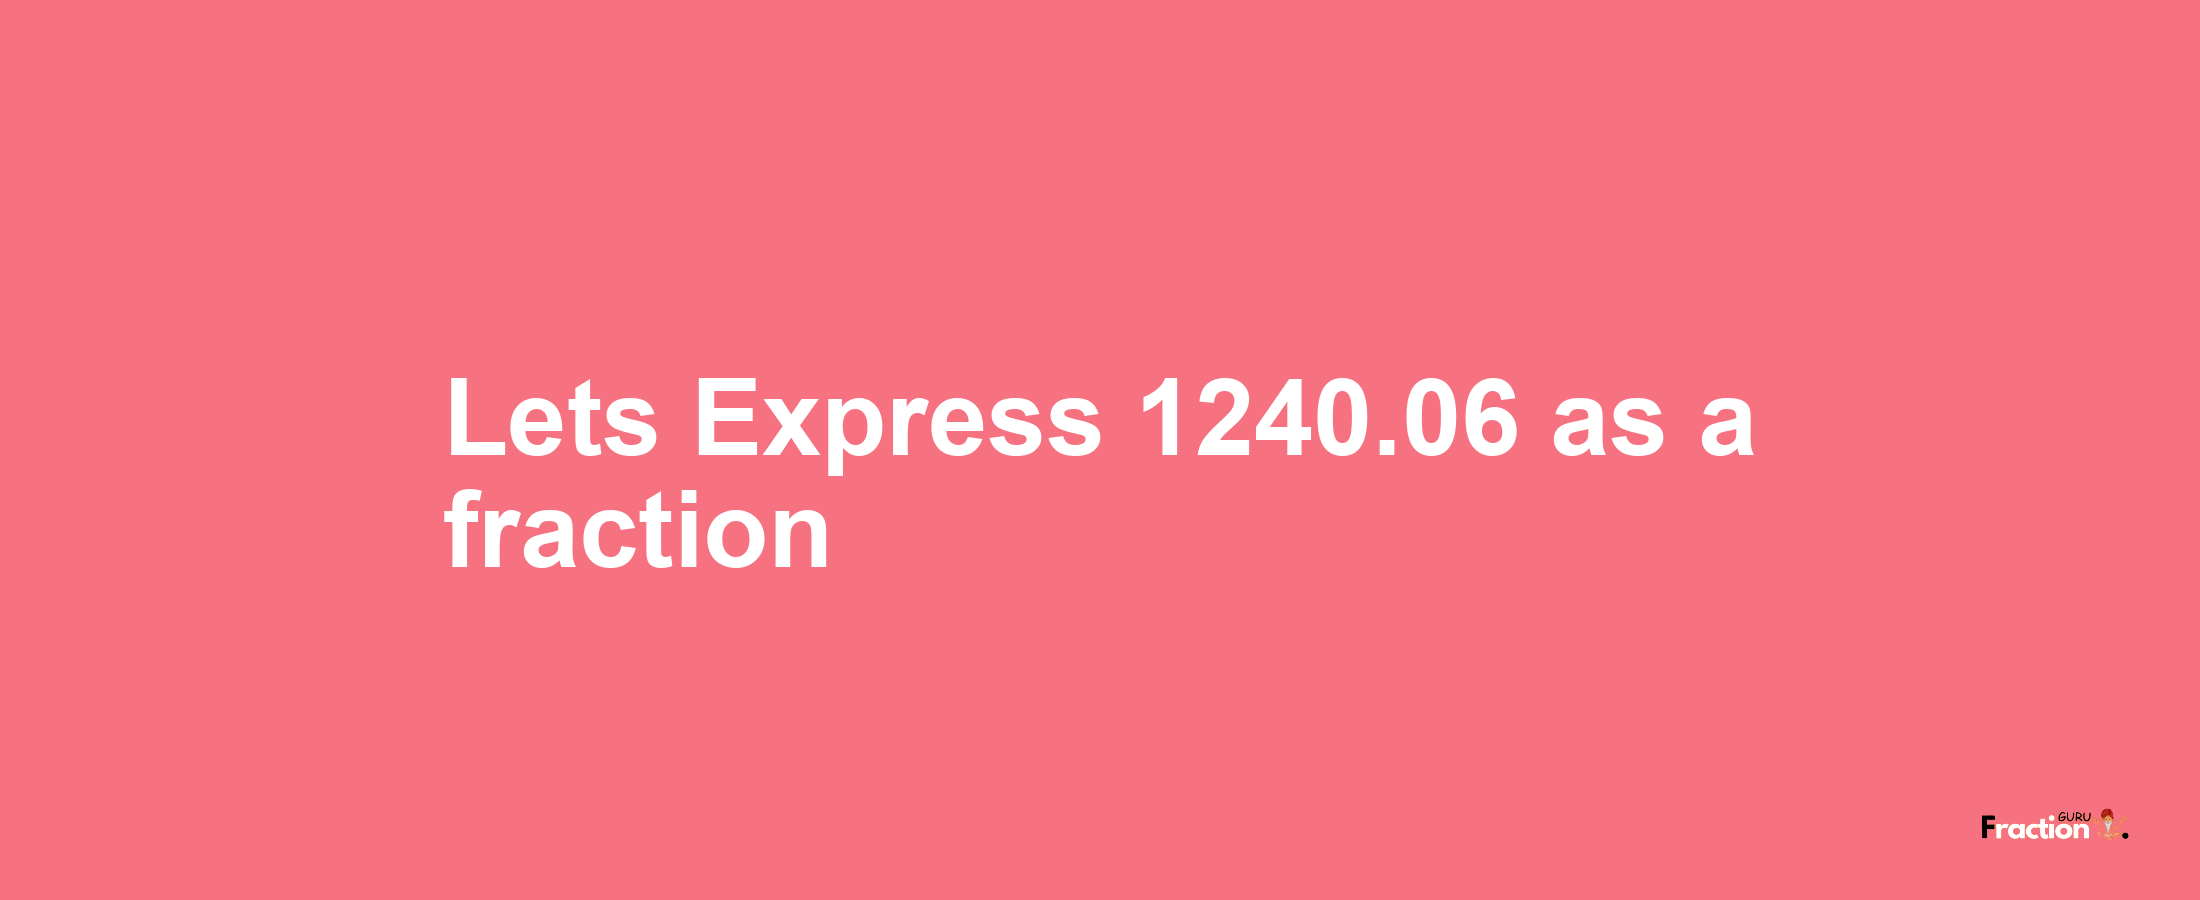 Lets Express 1240.06 as afraction